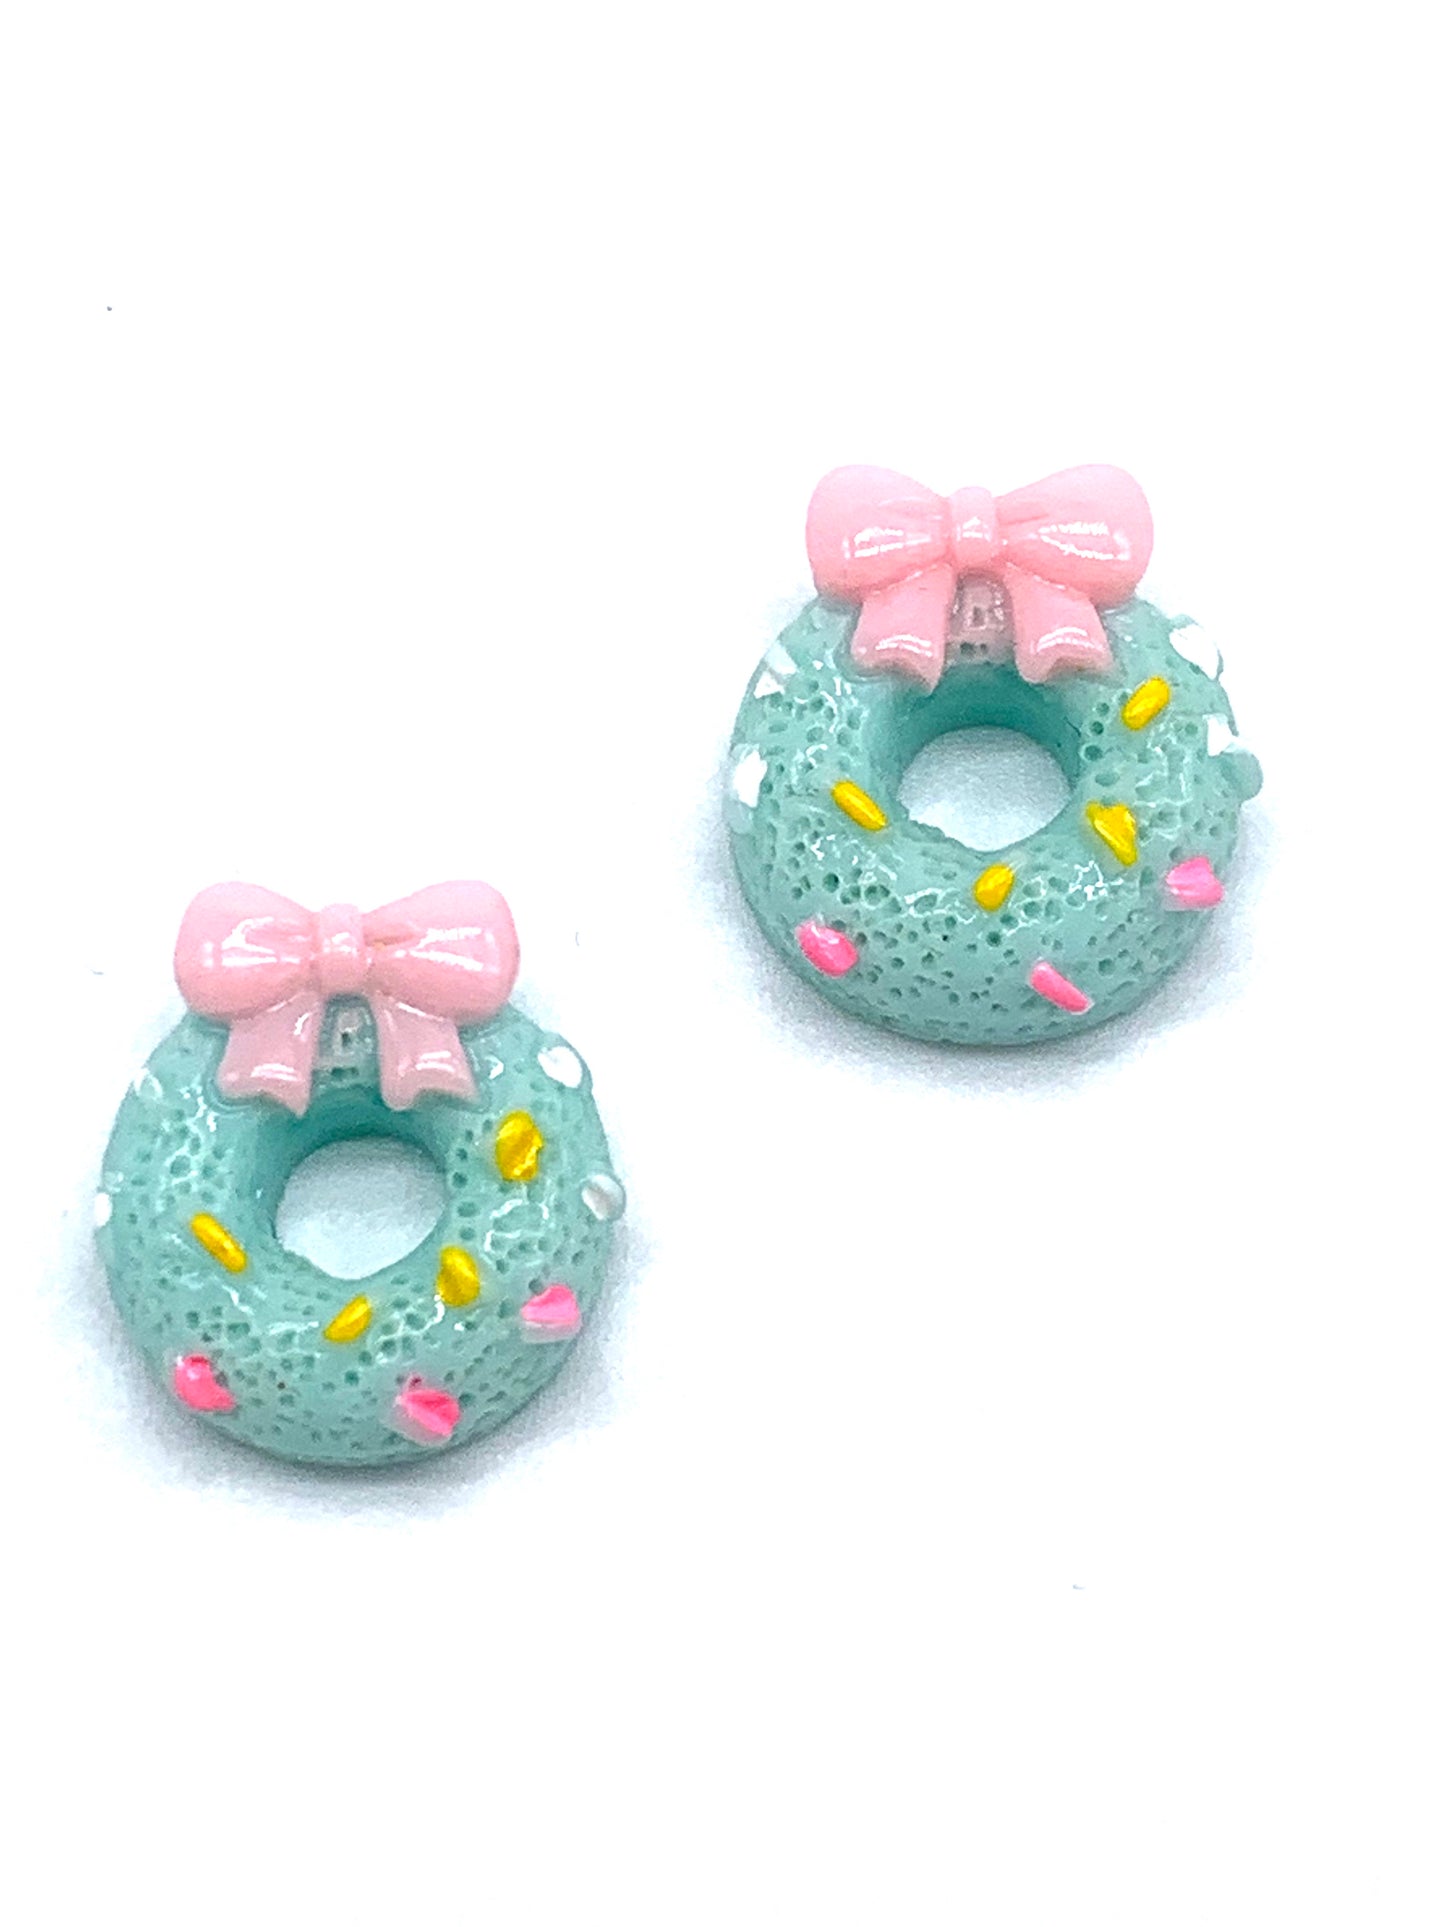 Donut Bow (multiple colors)  Resin